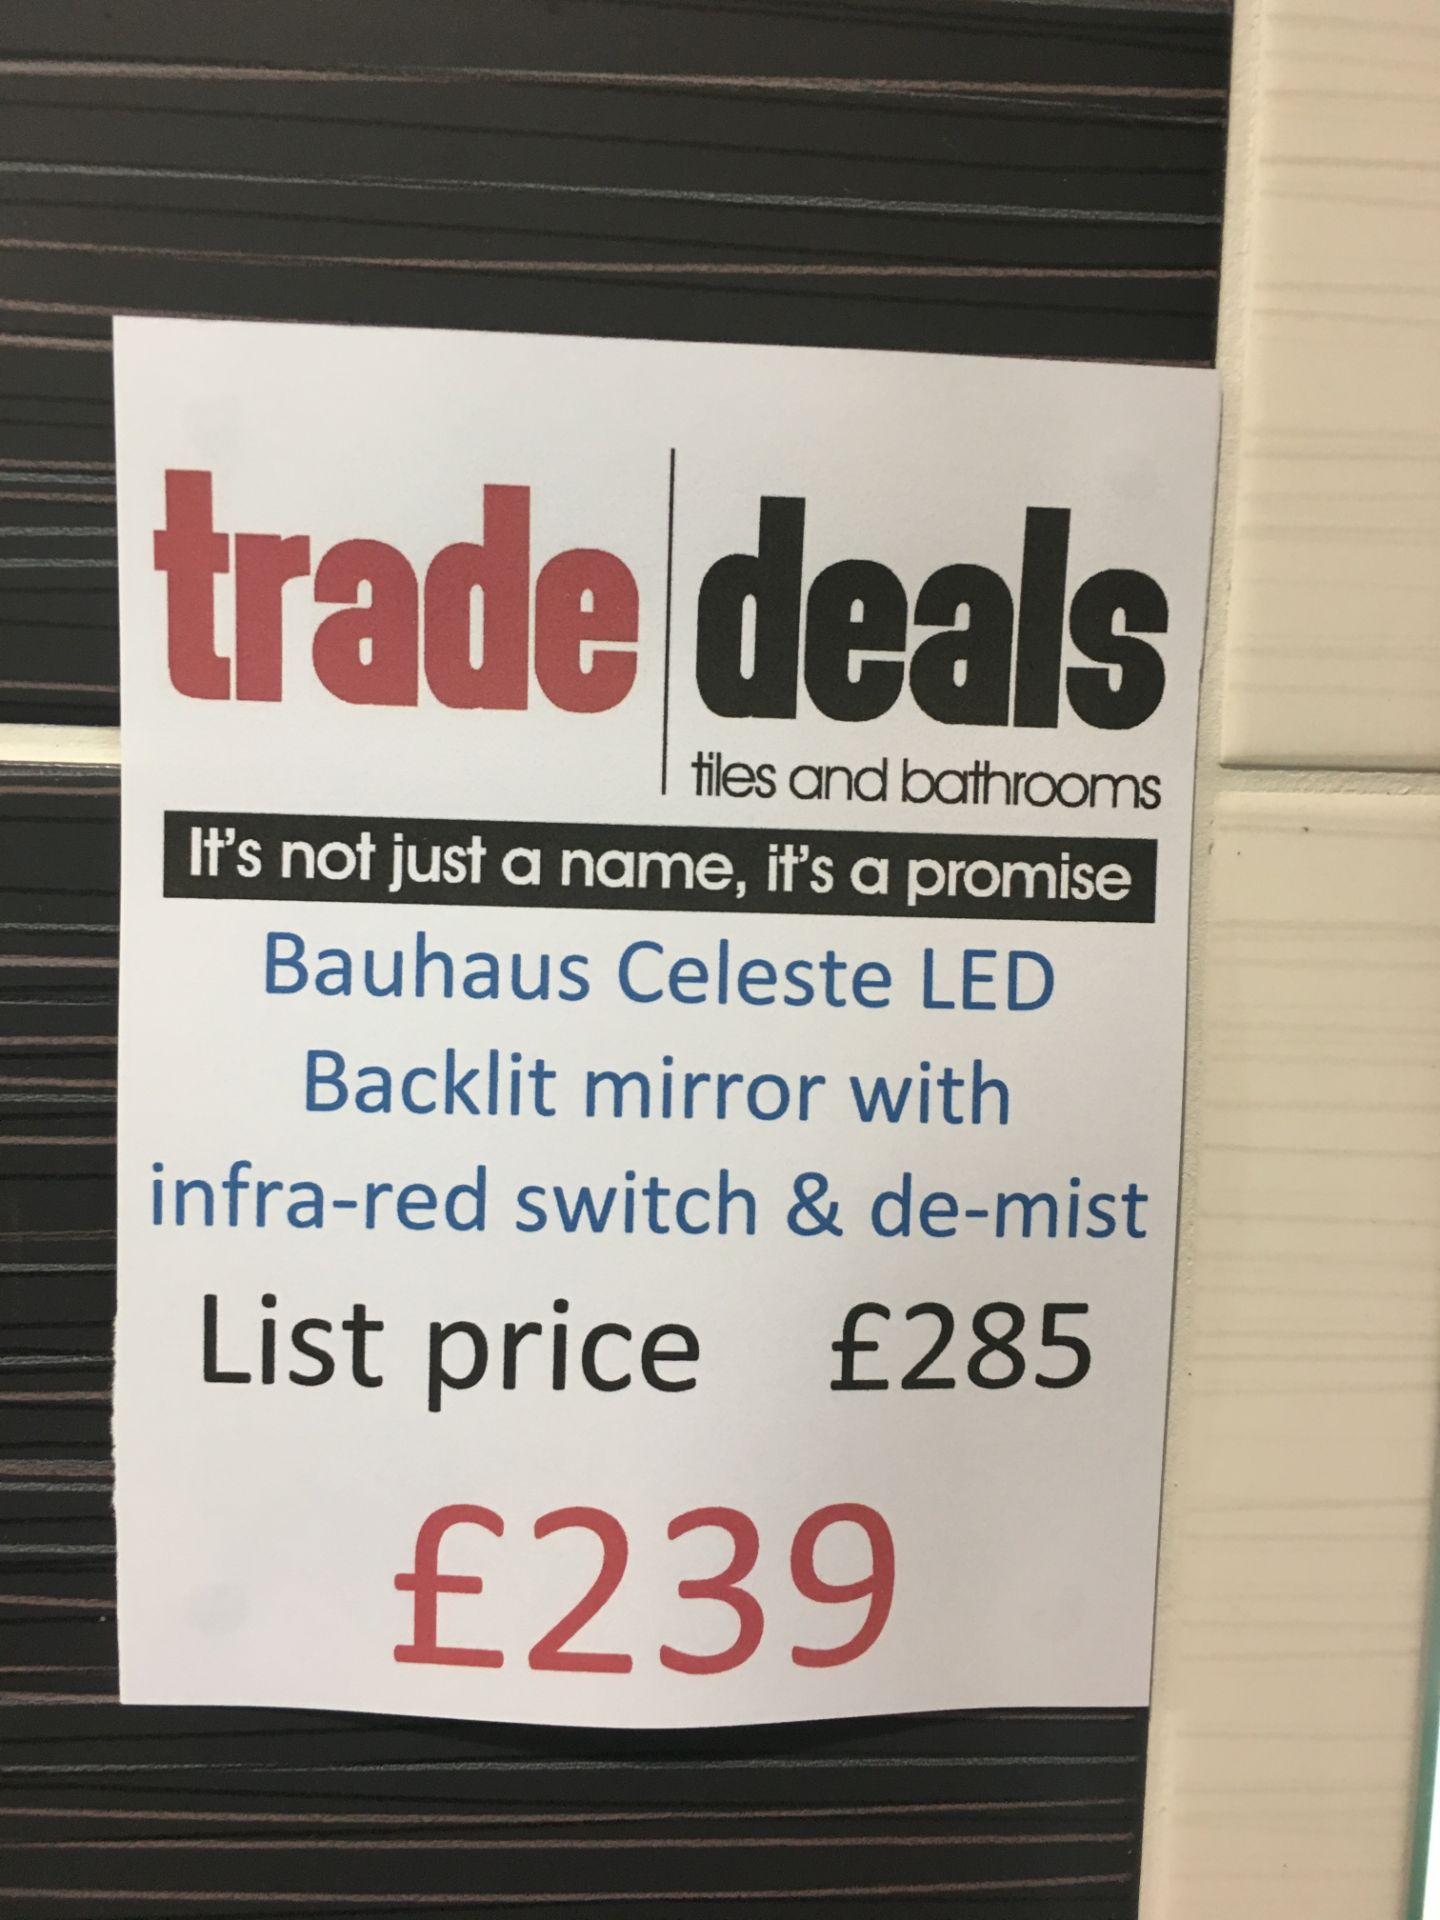 Bauhaus celeste LED backlit mirror w/ infra-red switch and demist£285 reduced to £239 - Image 4 of 4